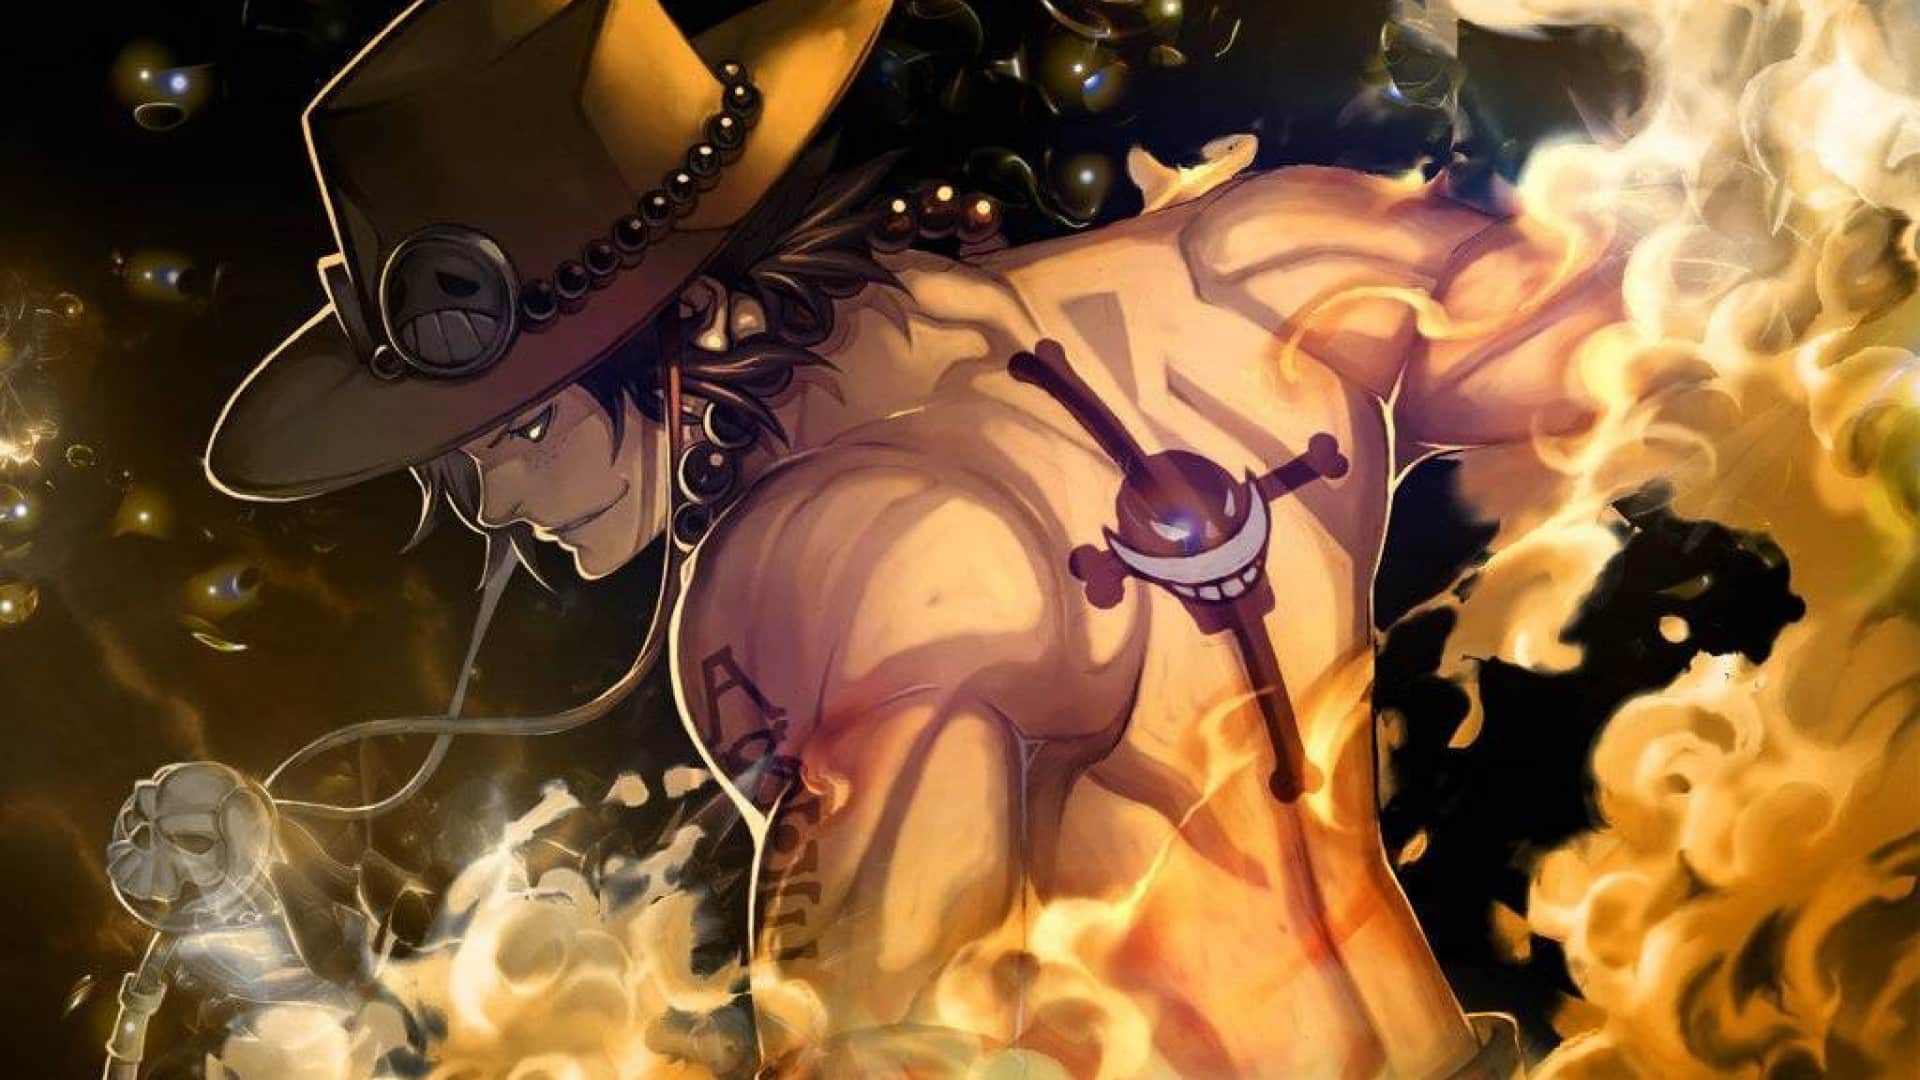 The Real Reason Why One Piece Creator Killed off Portgas D. Ace